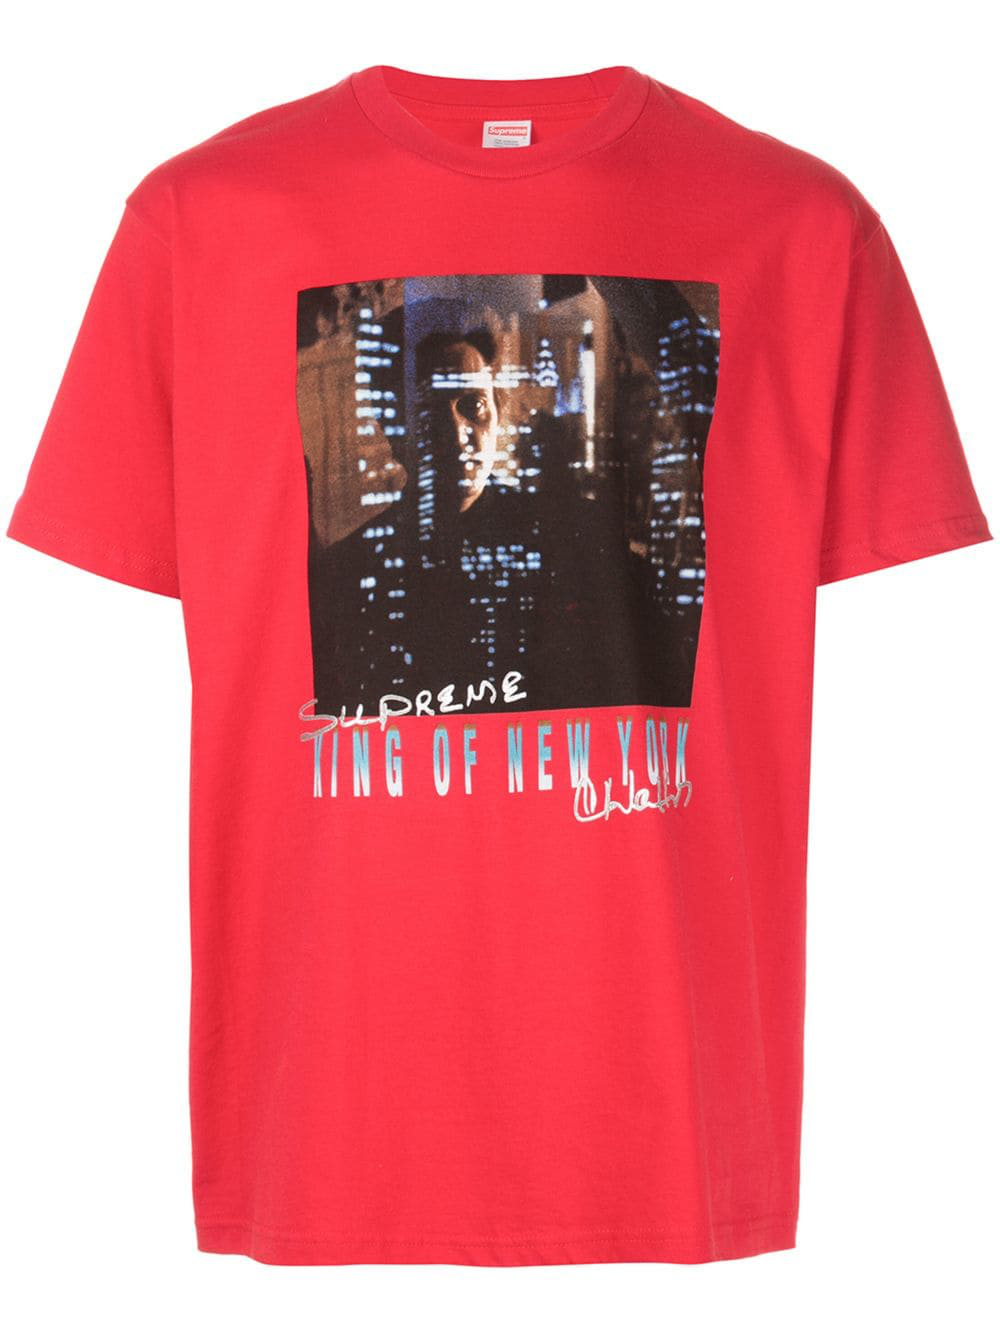 Online ing supreme king of new york t shirt guest cheap